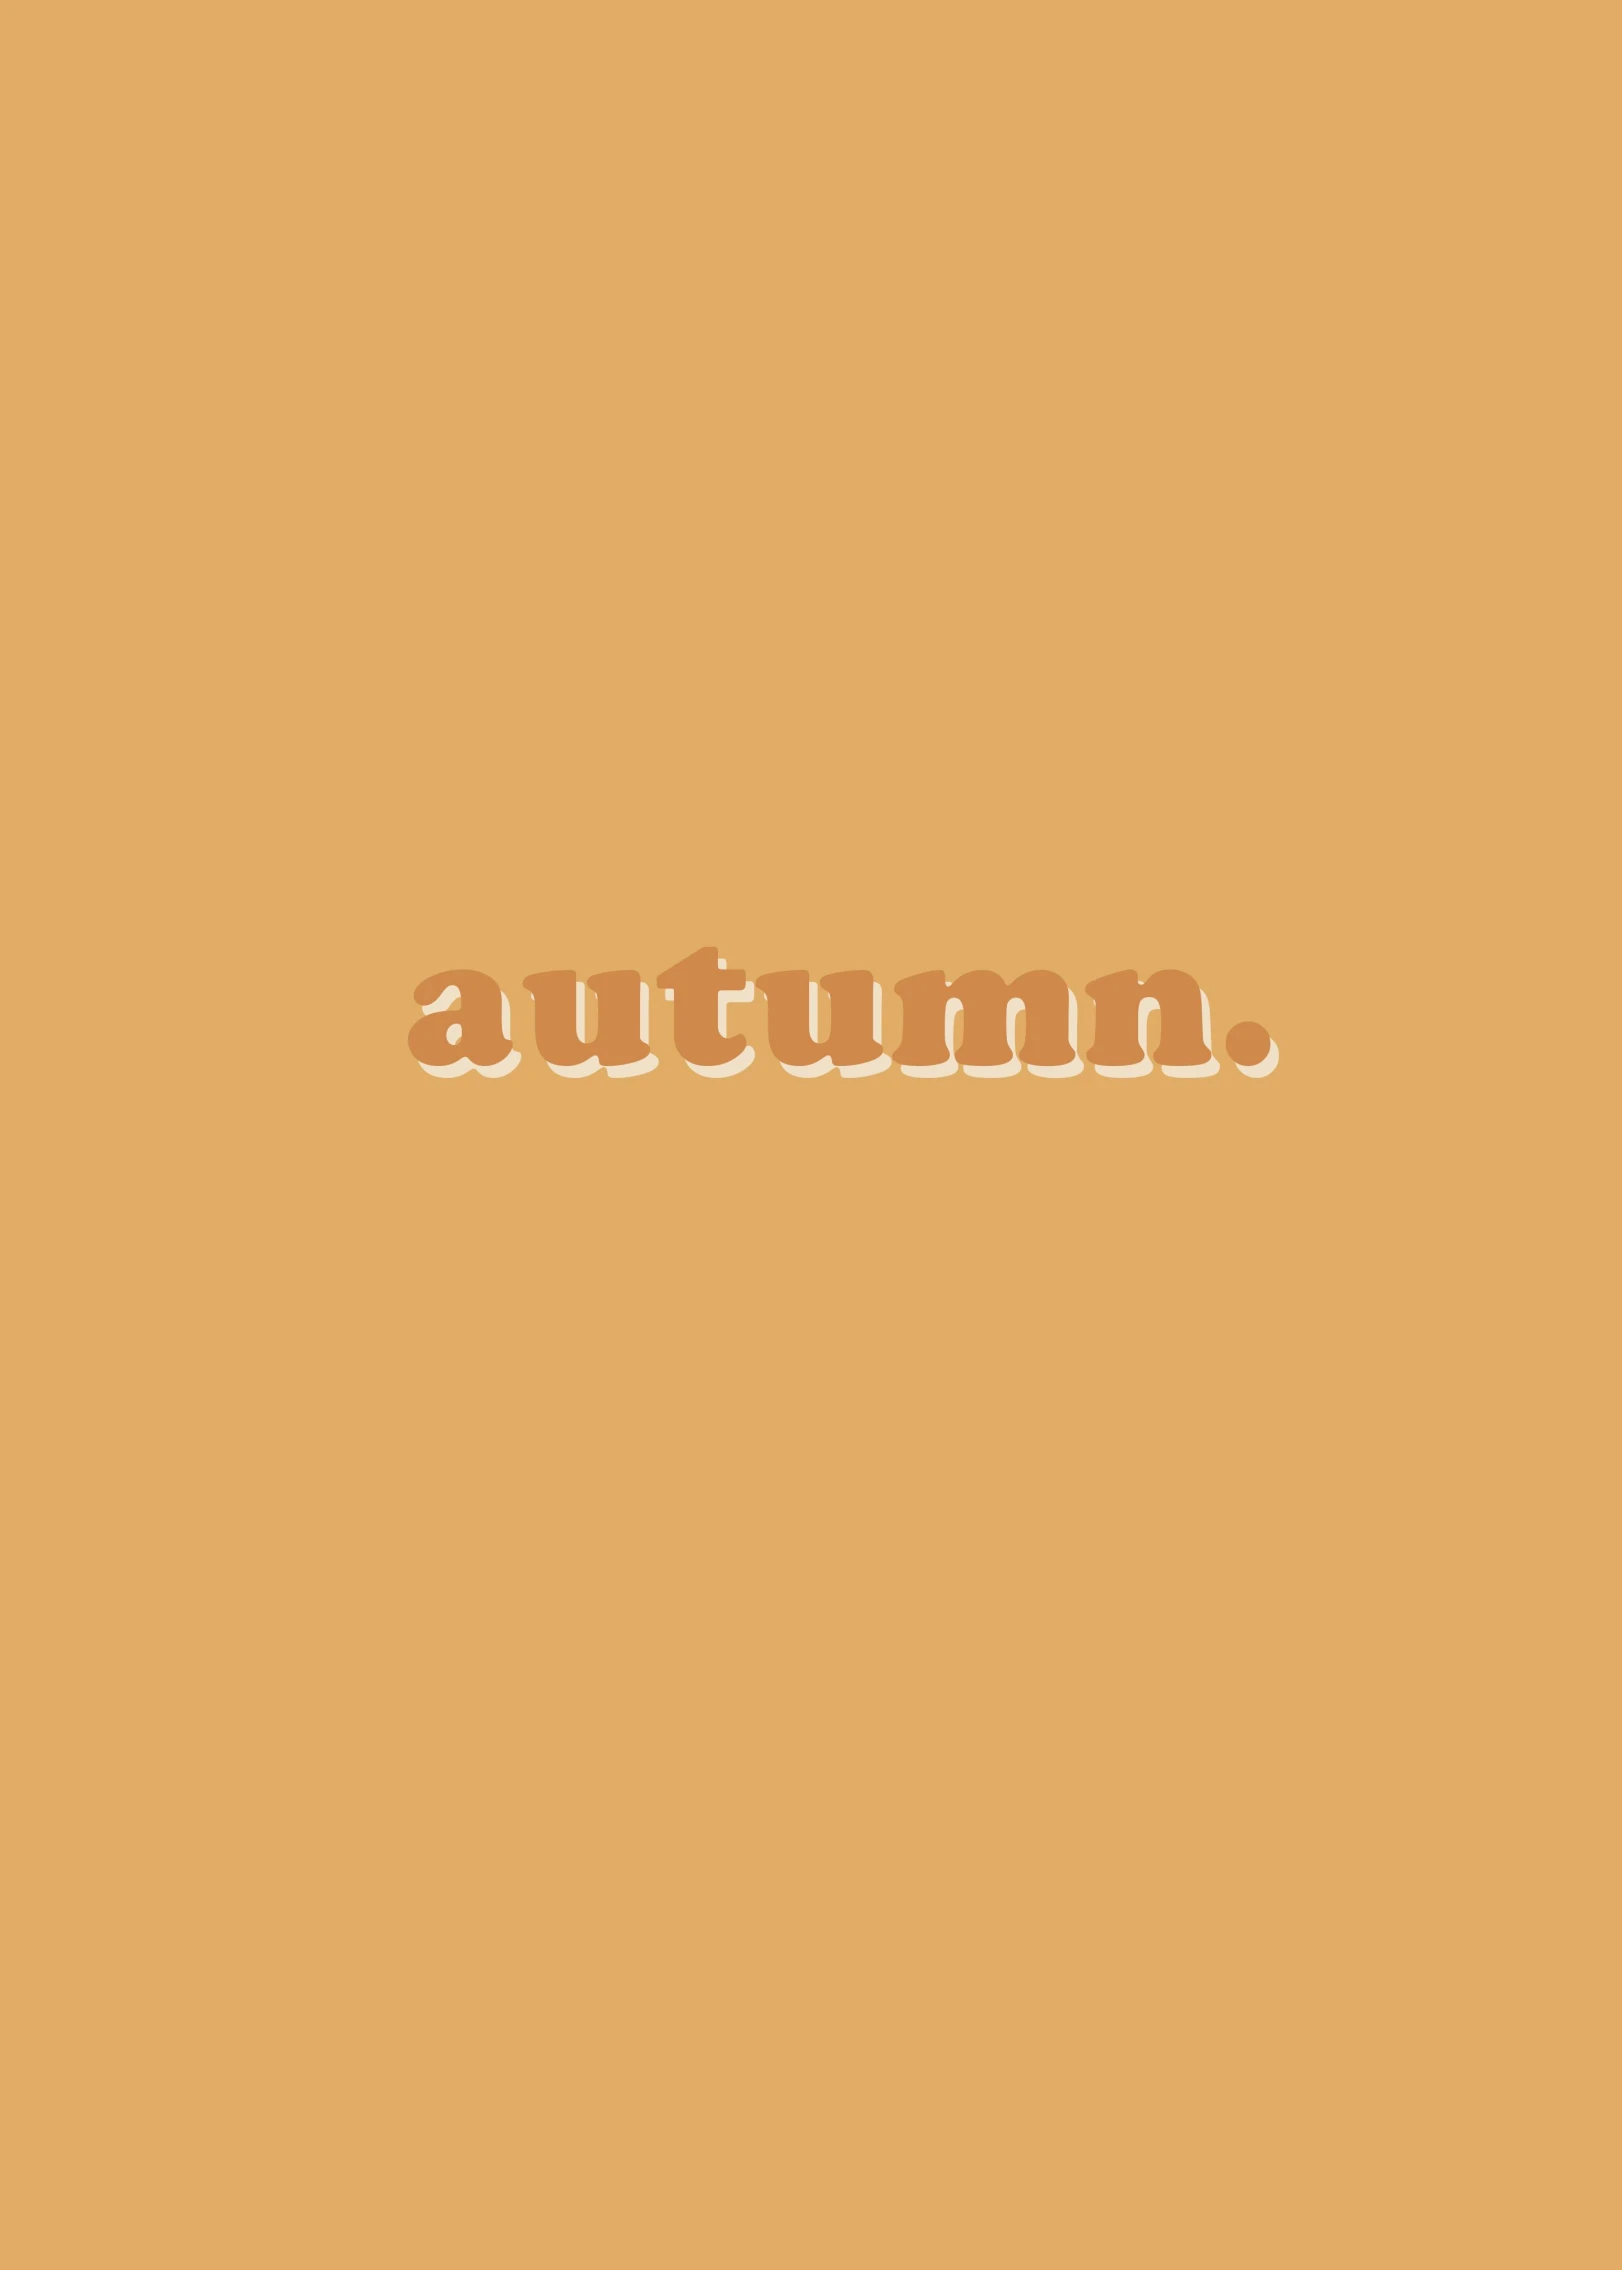 an orange background with the word autumn on it, an album cover, tumblr, aestheticism, 2 5 6 x 2 5 6, !! muted colors!!, trending on r/streetwear, beige and gold tones